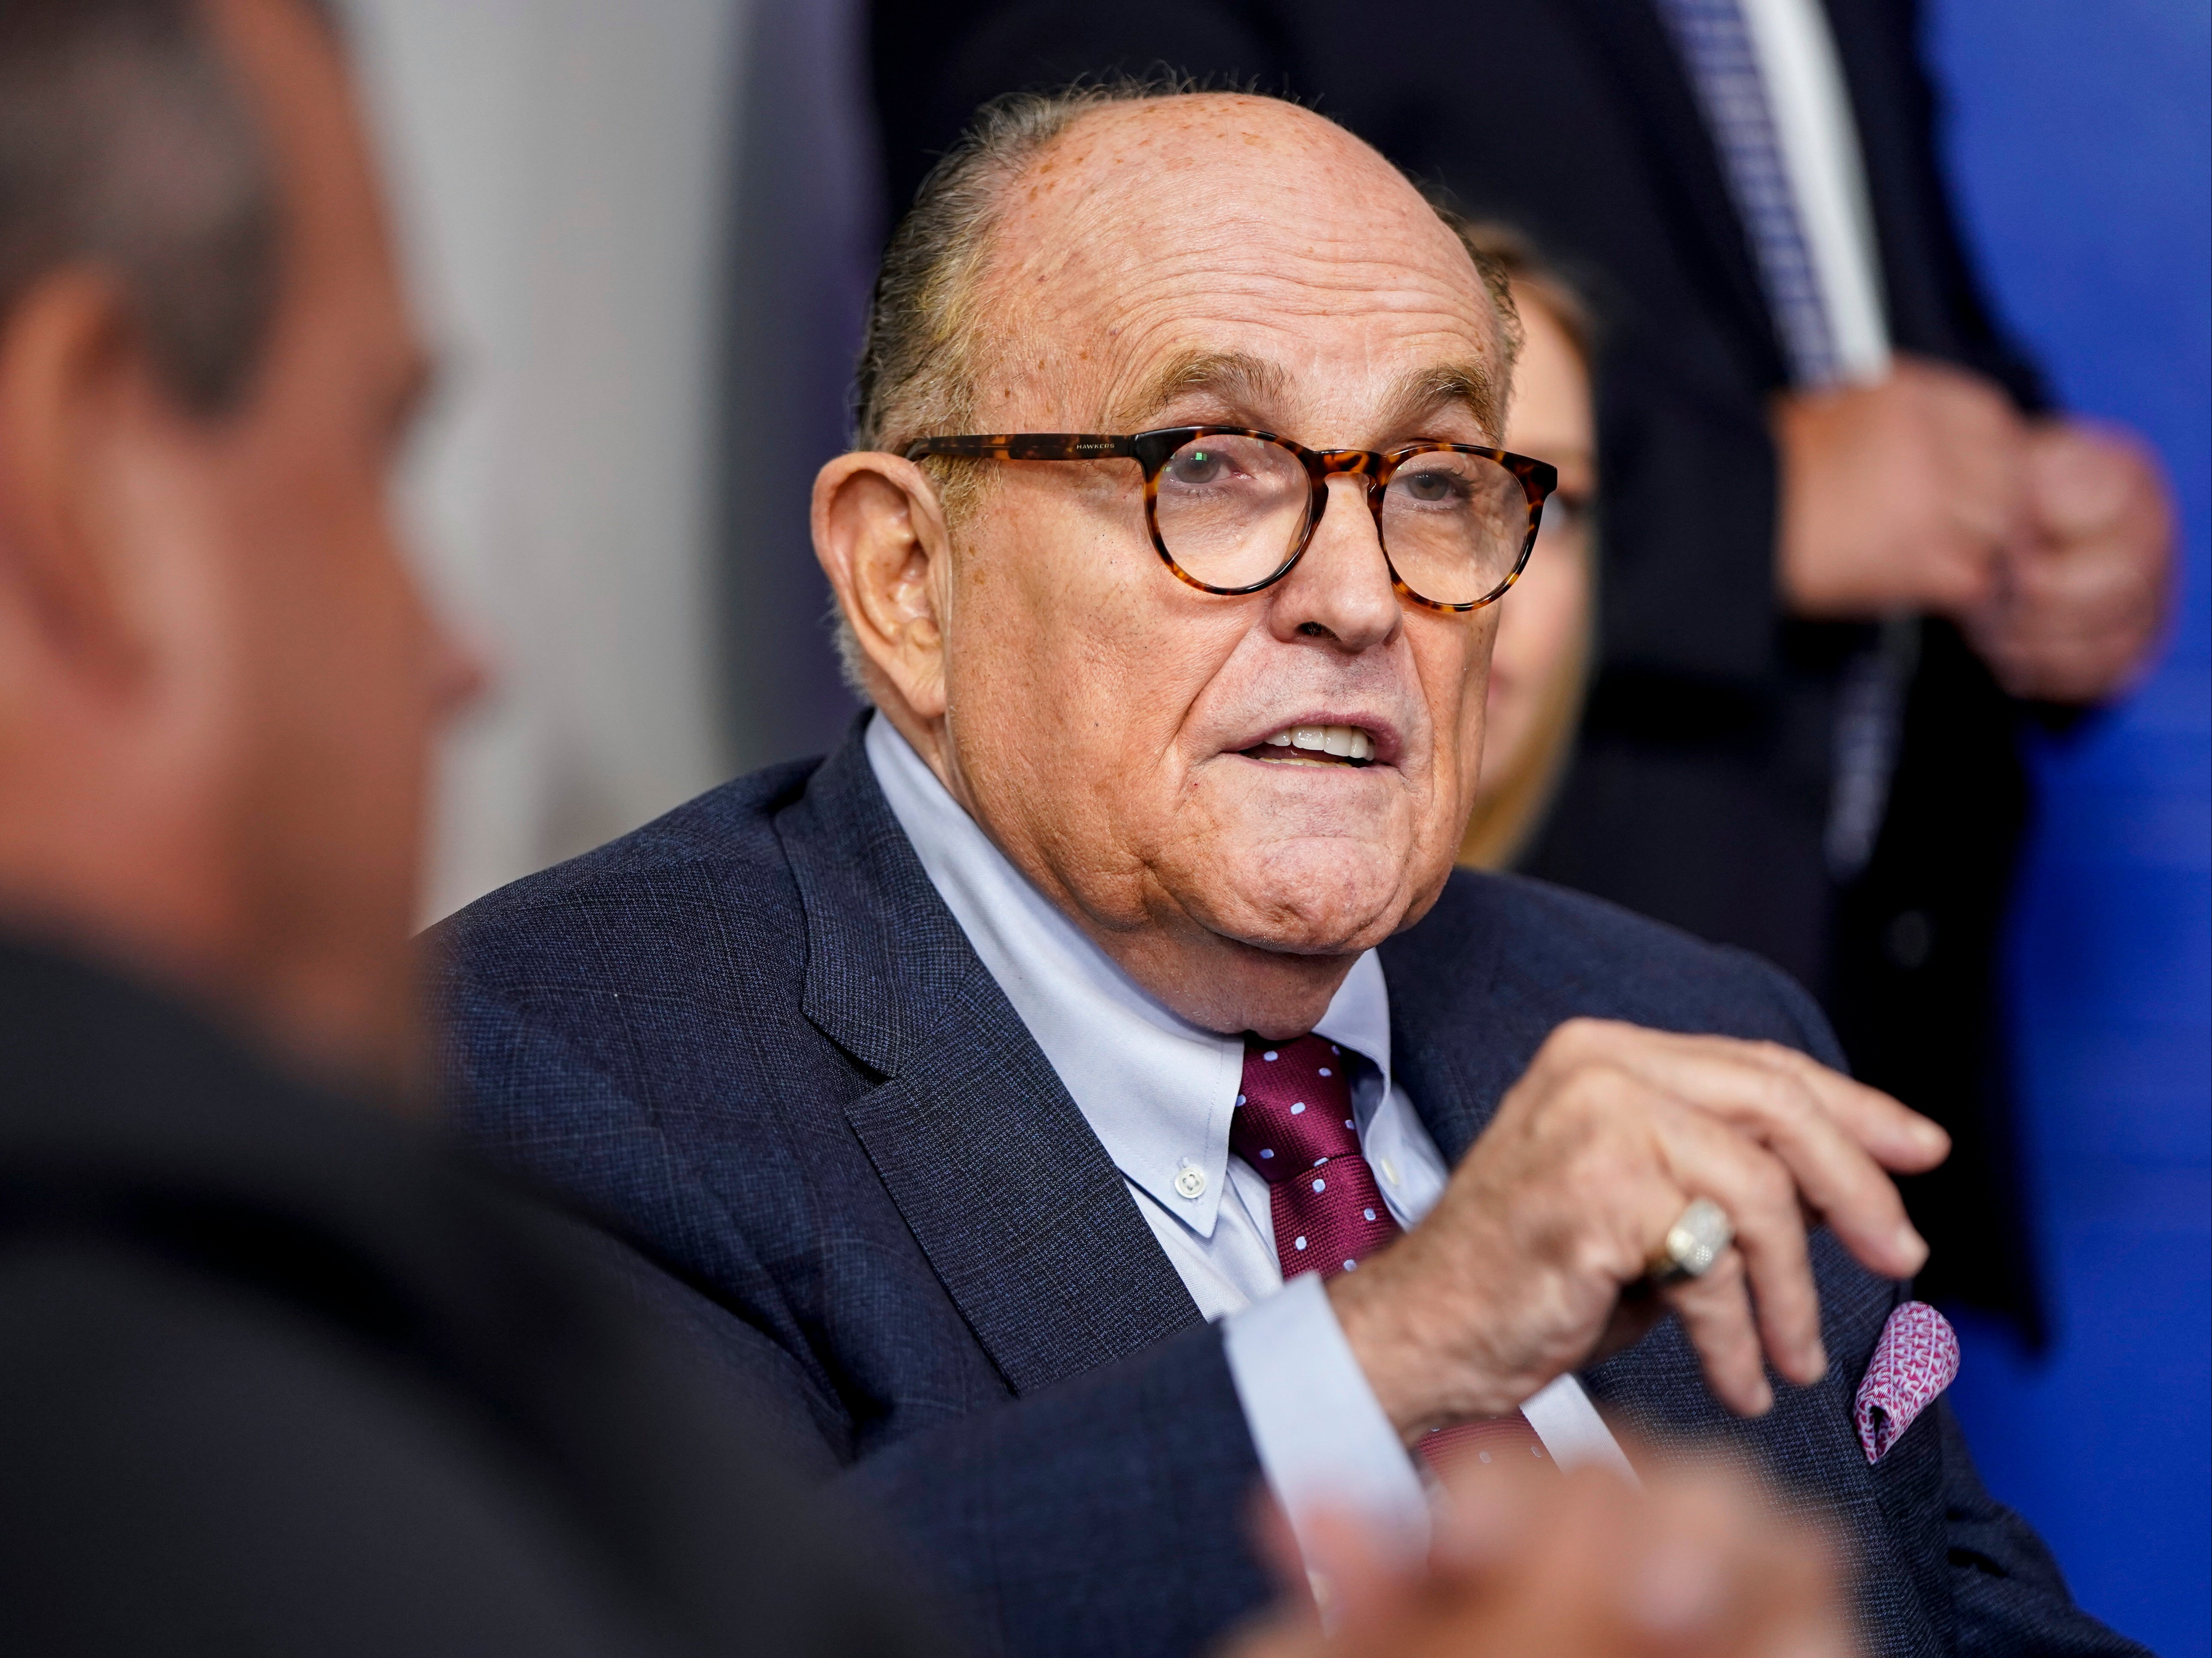 It was former New York mayor Rudy Giuliani, now Trump’s lawyer, who supposedly handed the emails over to the ‘New York Post’